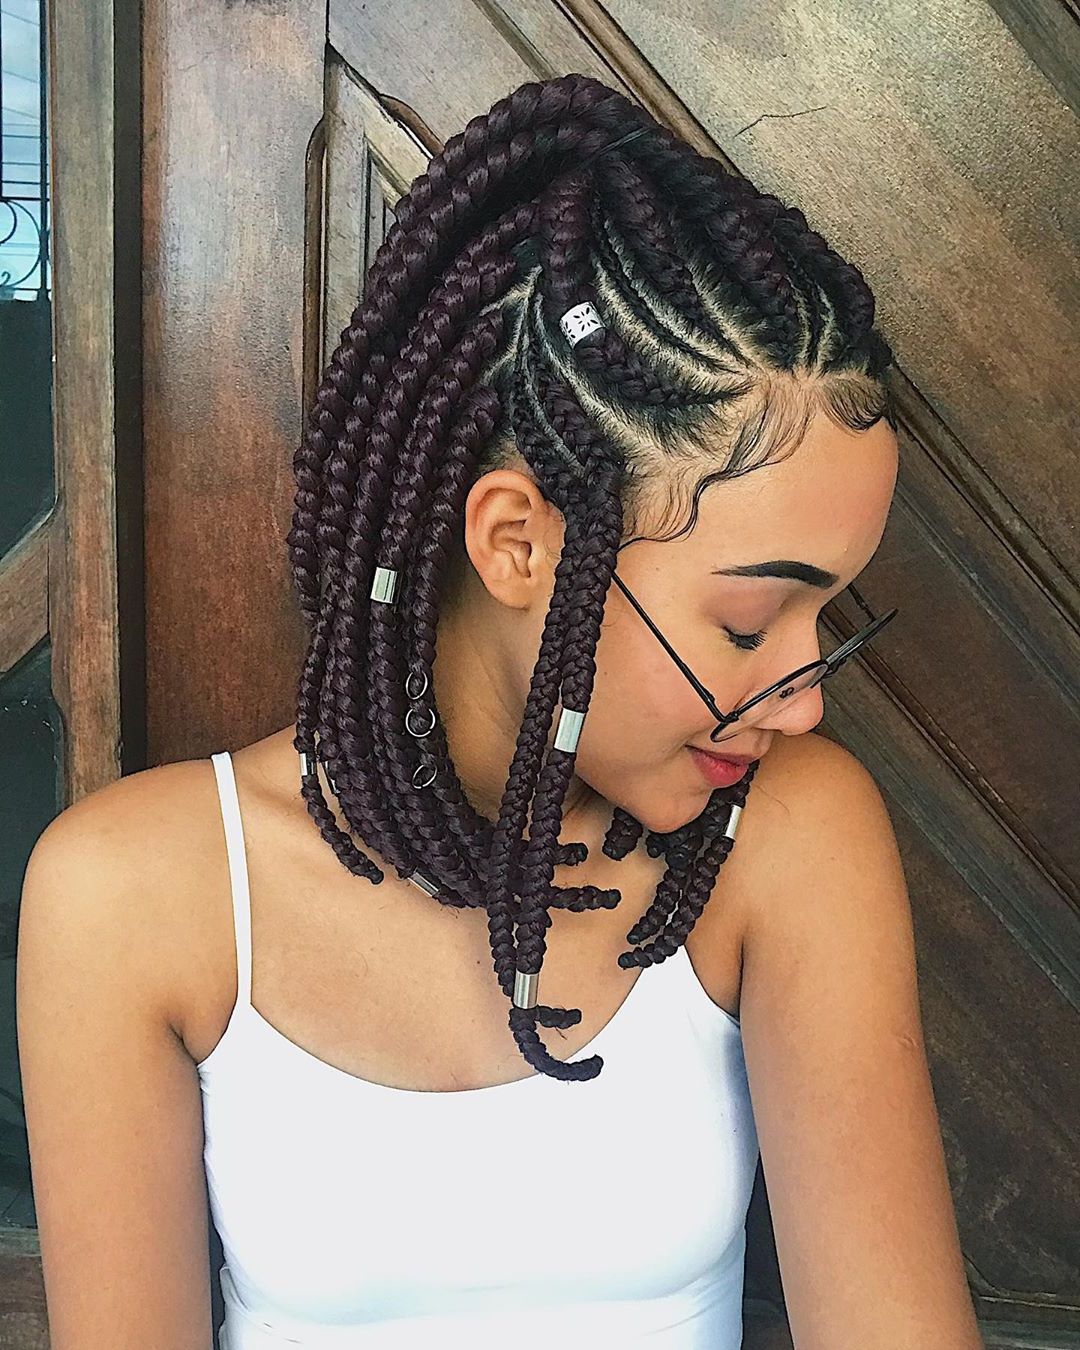 21 Bob Braid Hairstyles You'll Obsess Over For 2020 | Glamour Regarding Braided Bob Short Hairstyles (View 5 of 20)